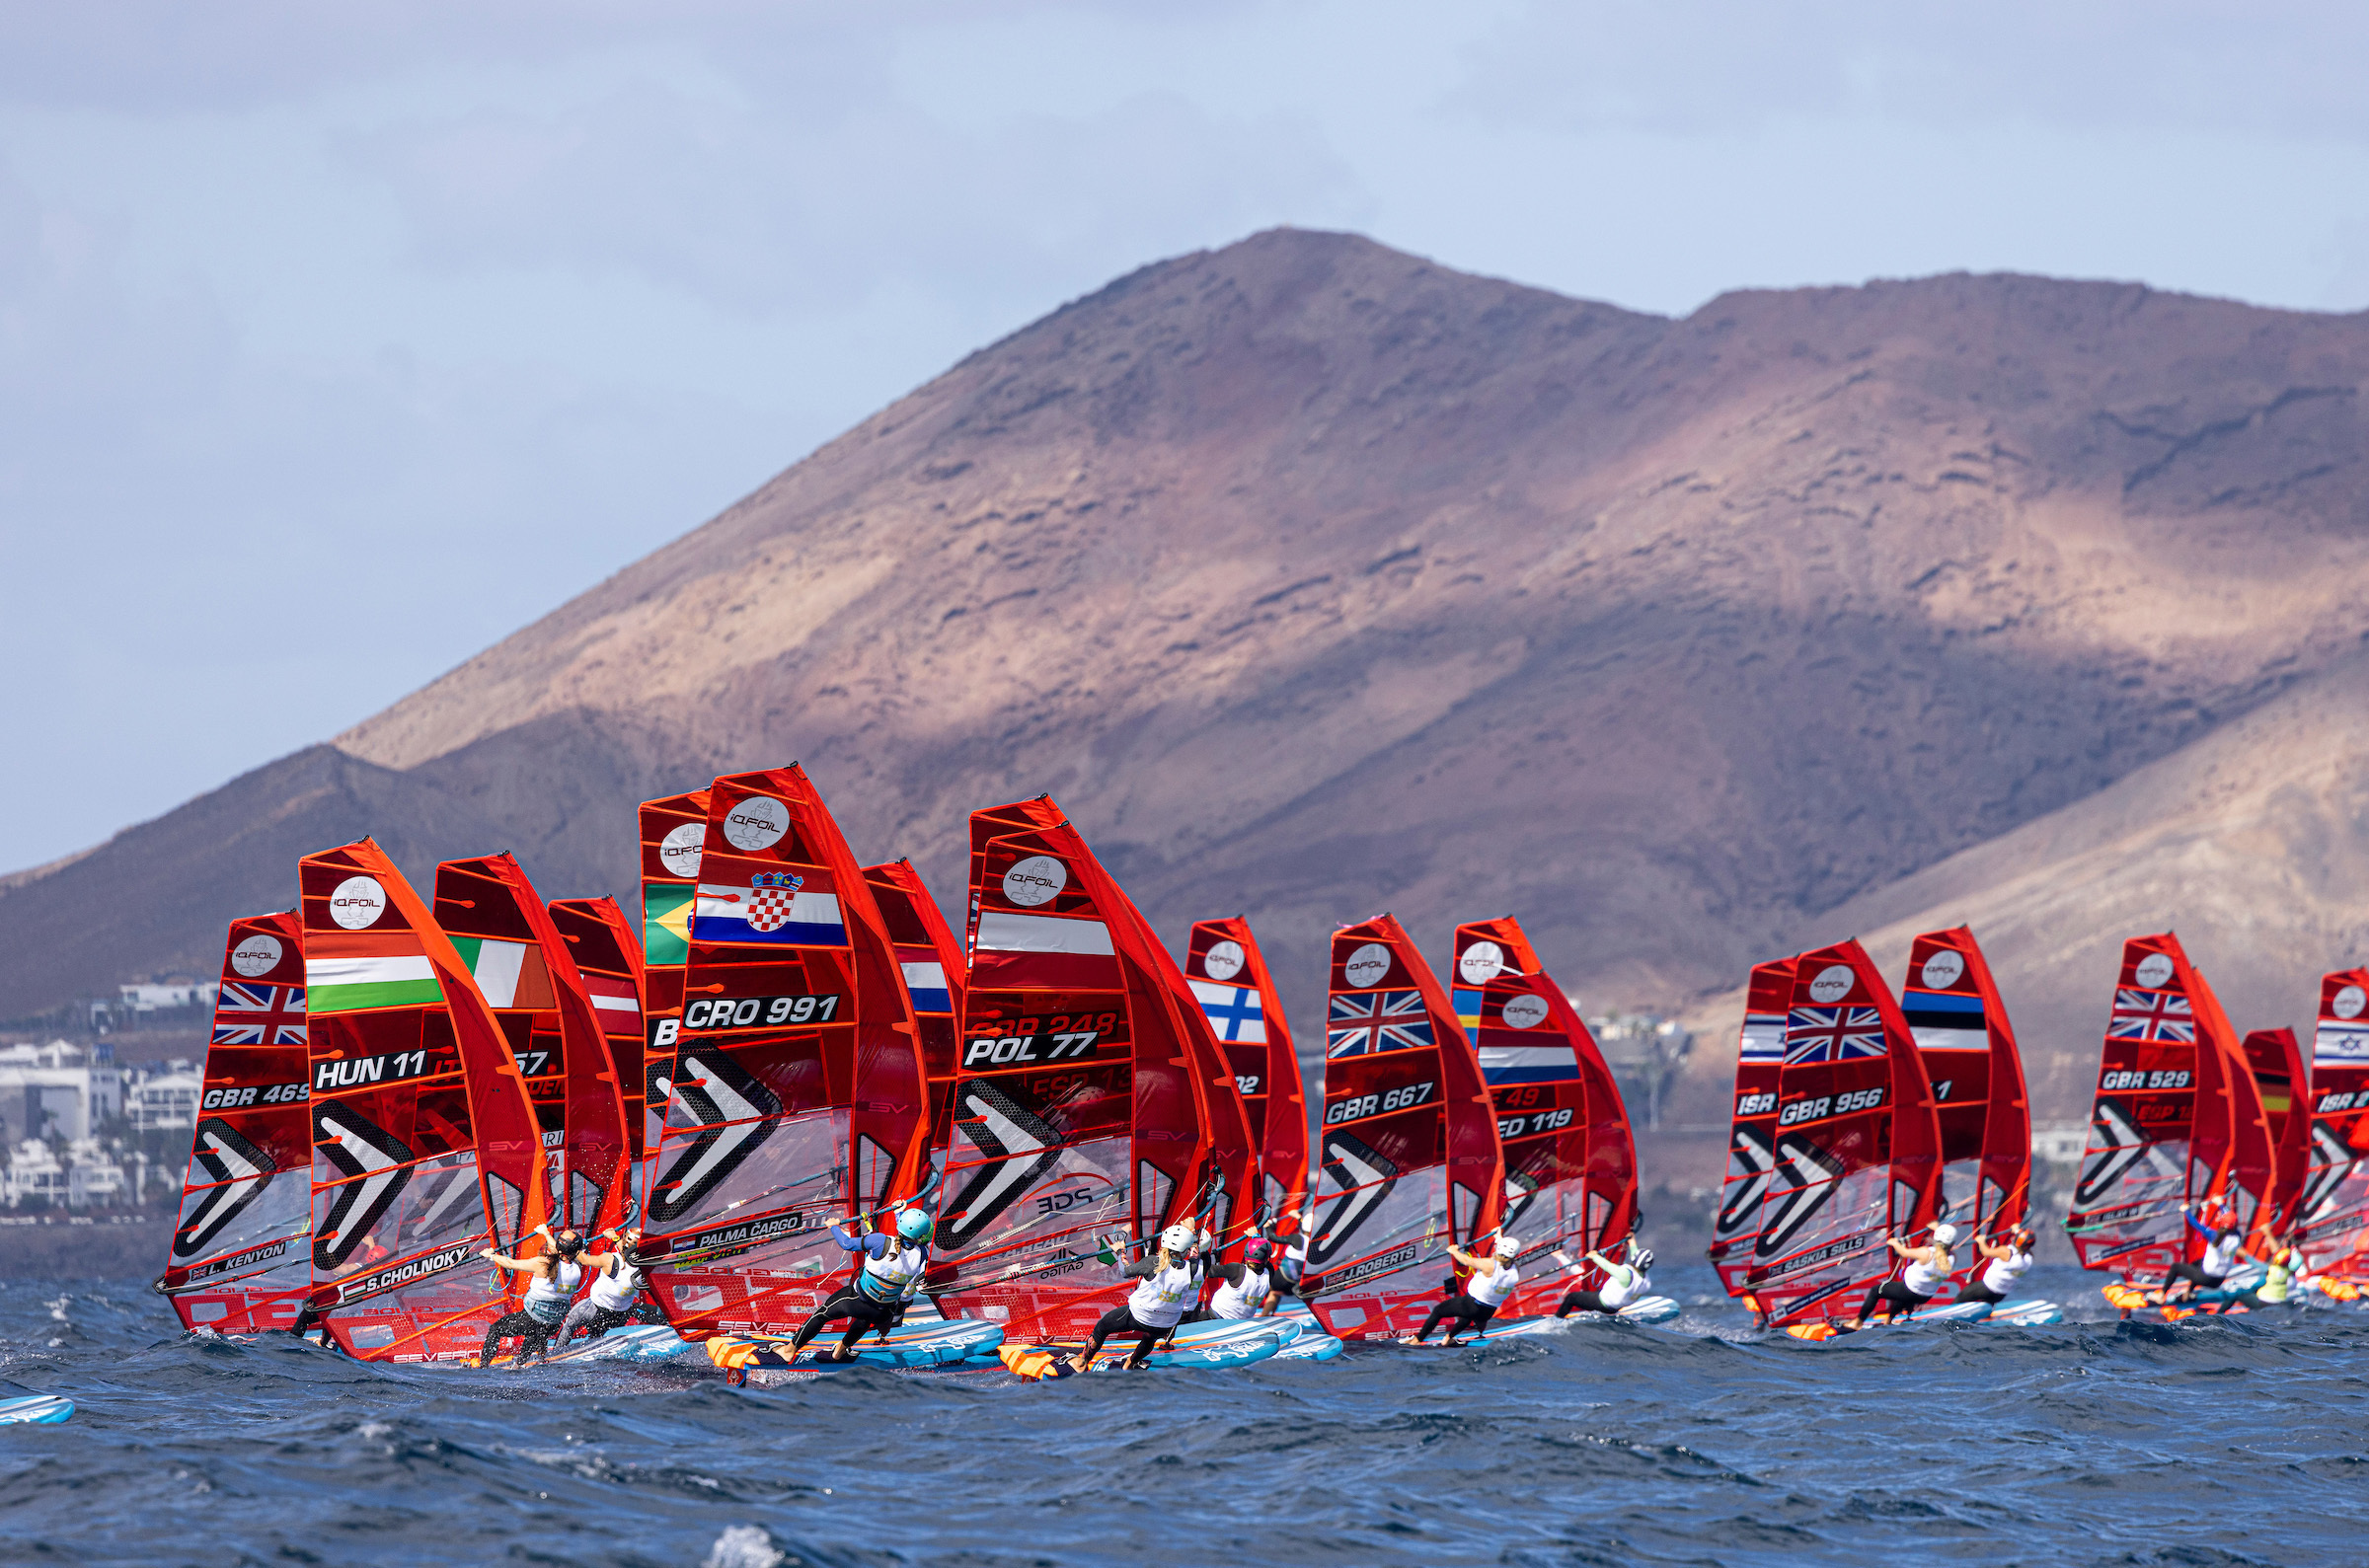 iQfoil Games Lanzarote 2023.
© Sailing Energy 
25 January, 2023